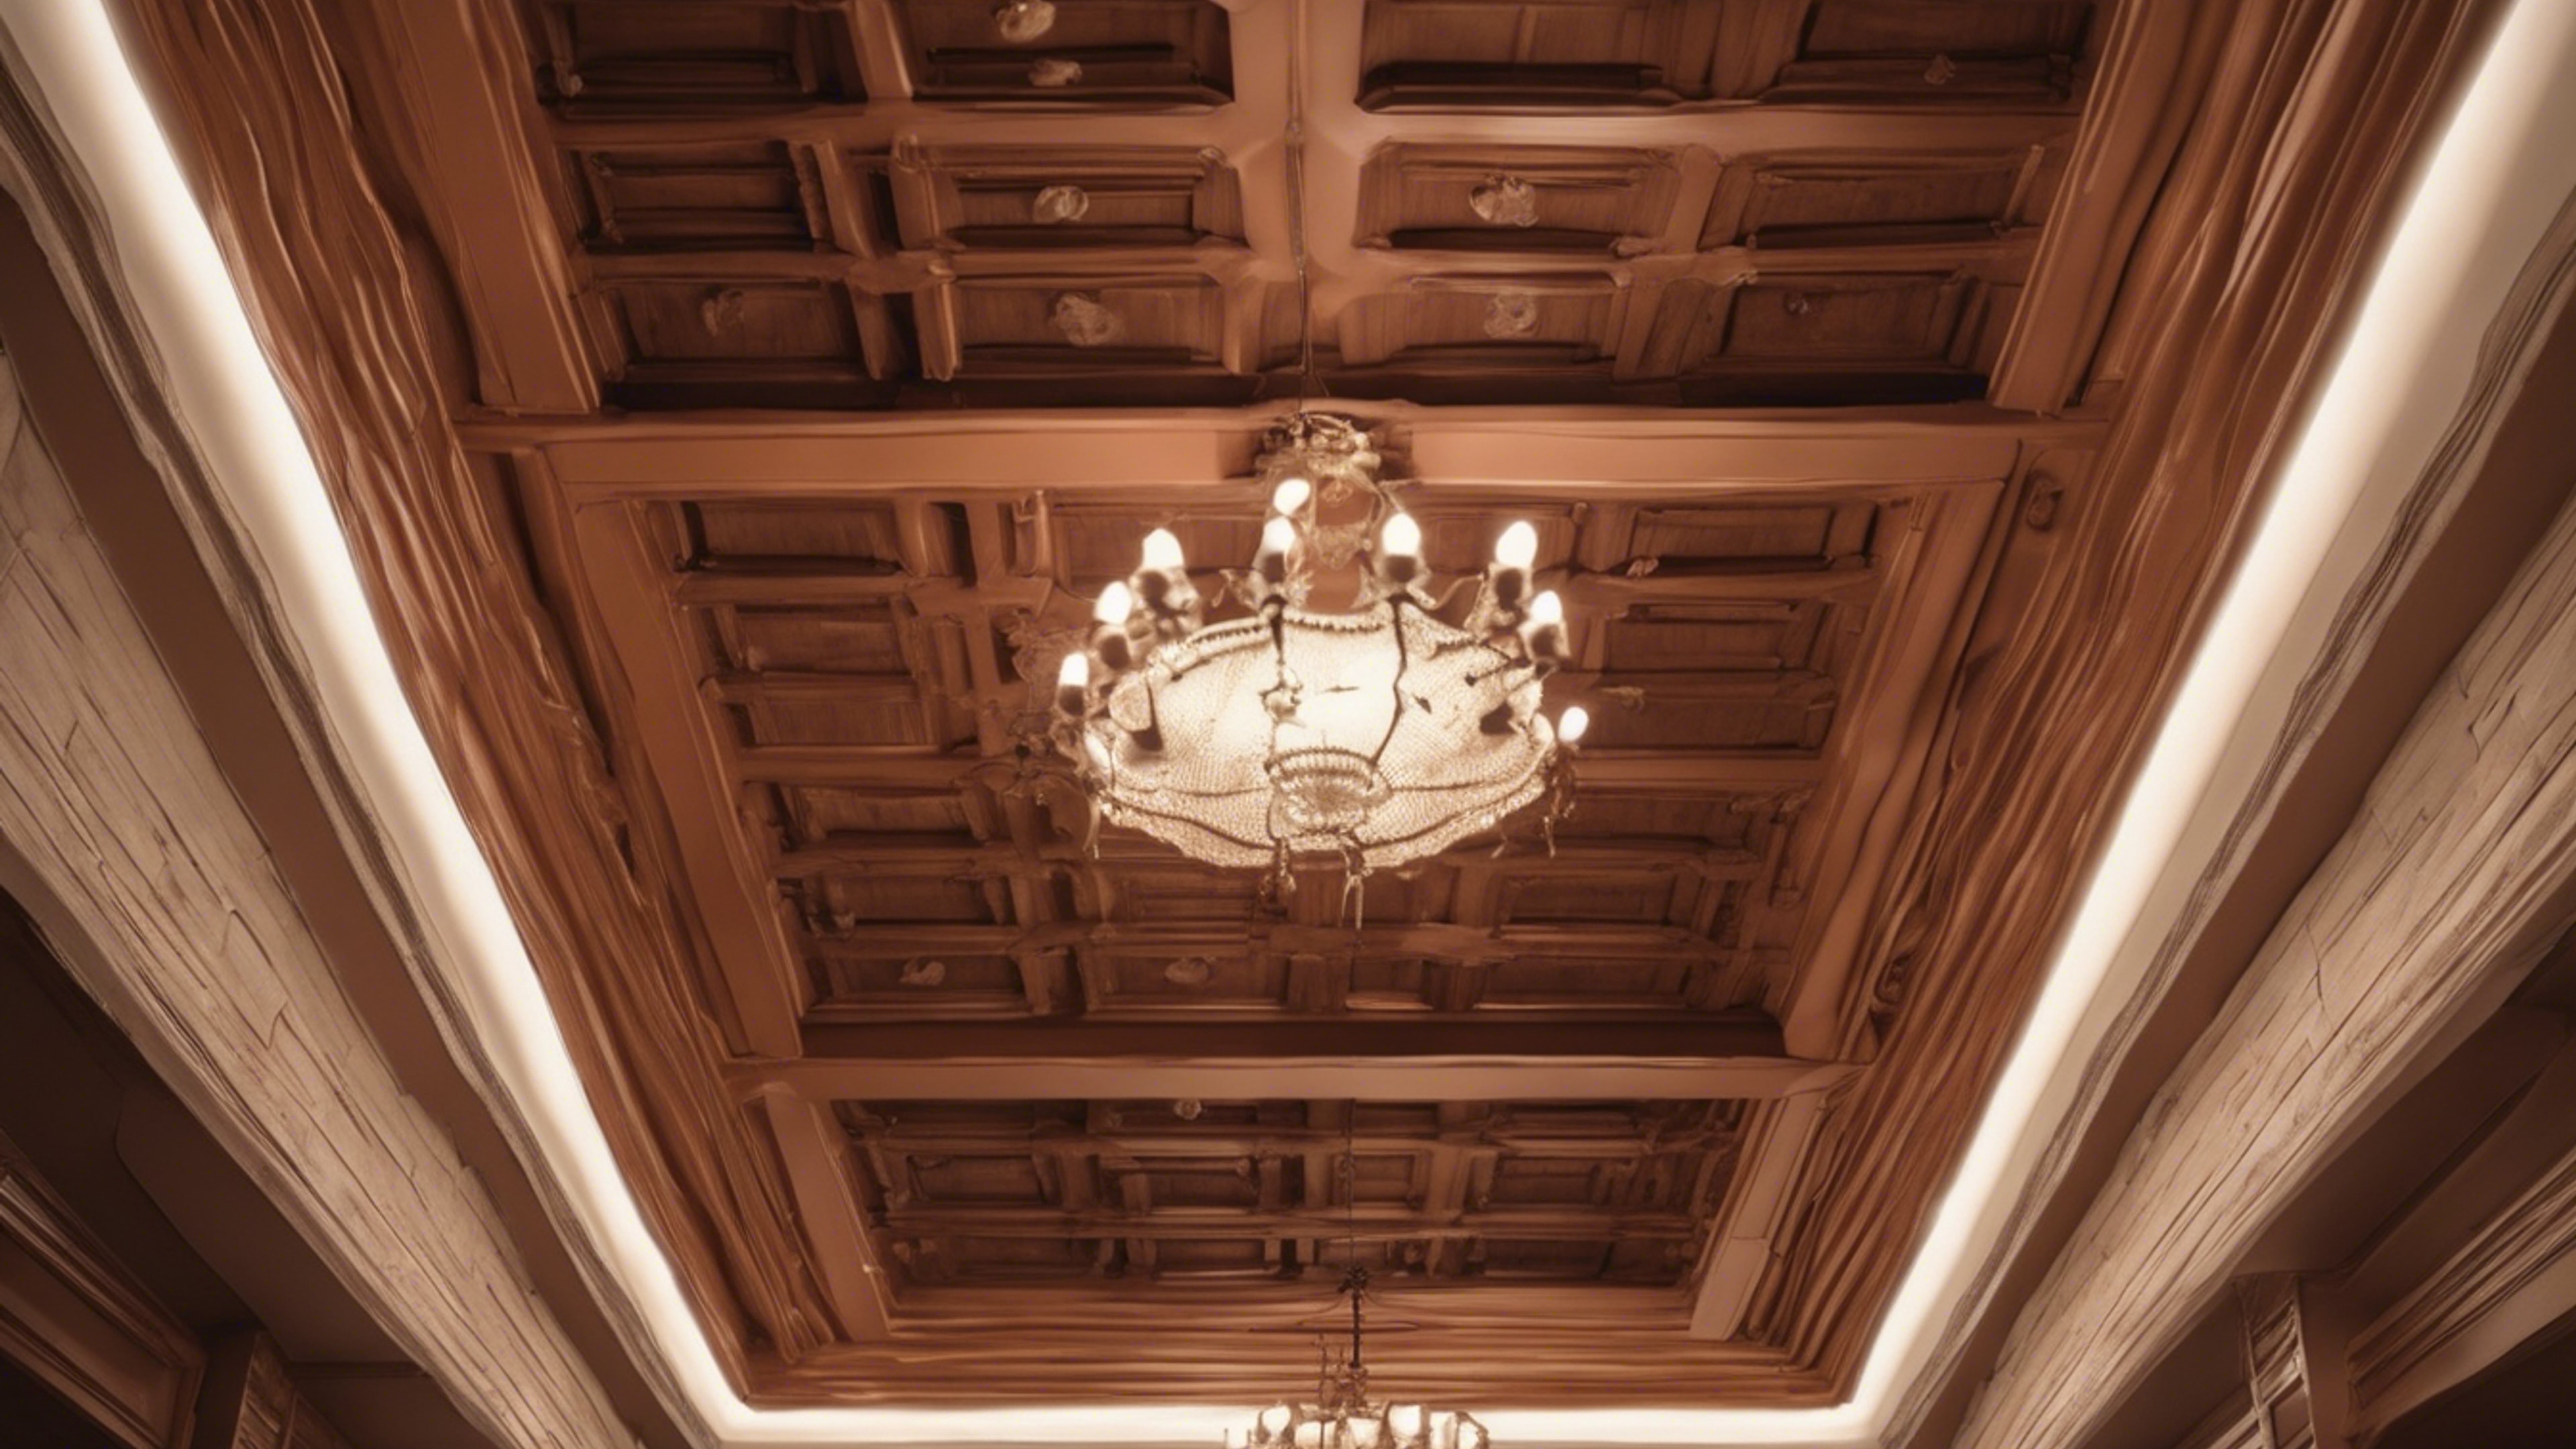 A warm brown coffered ceiling room decorated in traditional style壁紙[0b856da927b2485ba9d5]